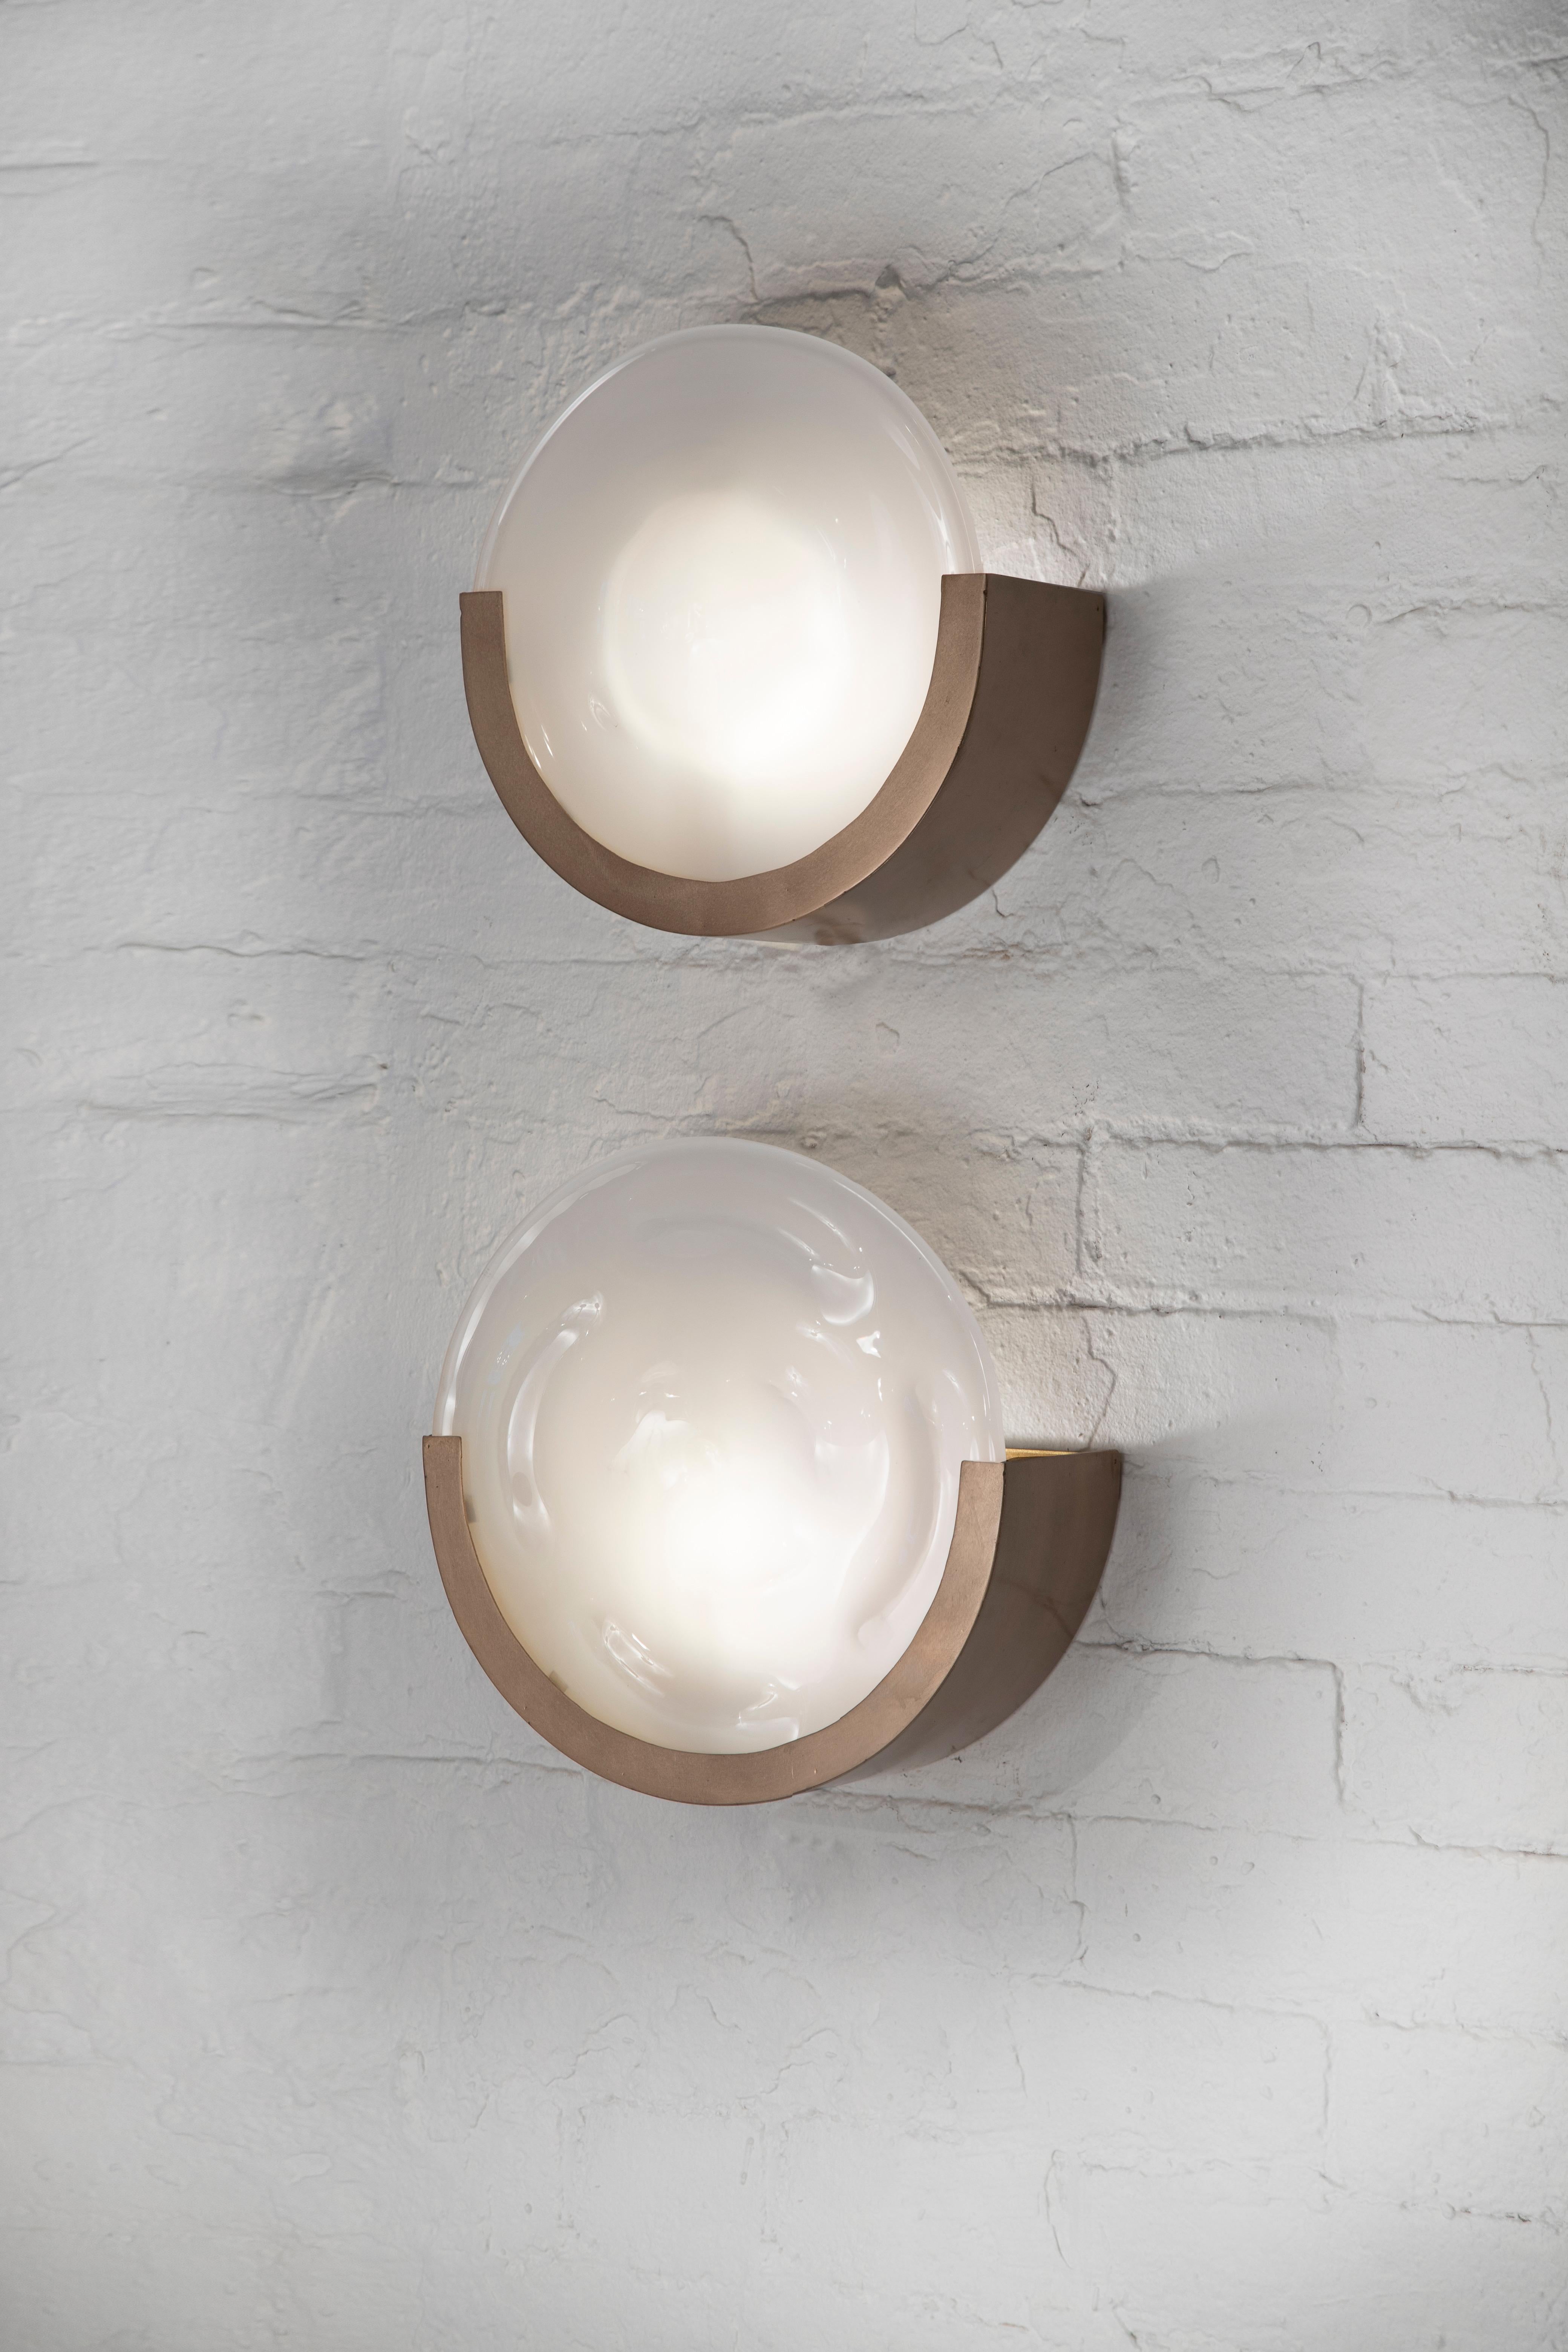 Inspired by the glow of the full moon, this original, organic modernist design is crafted entirely by hand and features a cast glass diffuser set in a bronze 